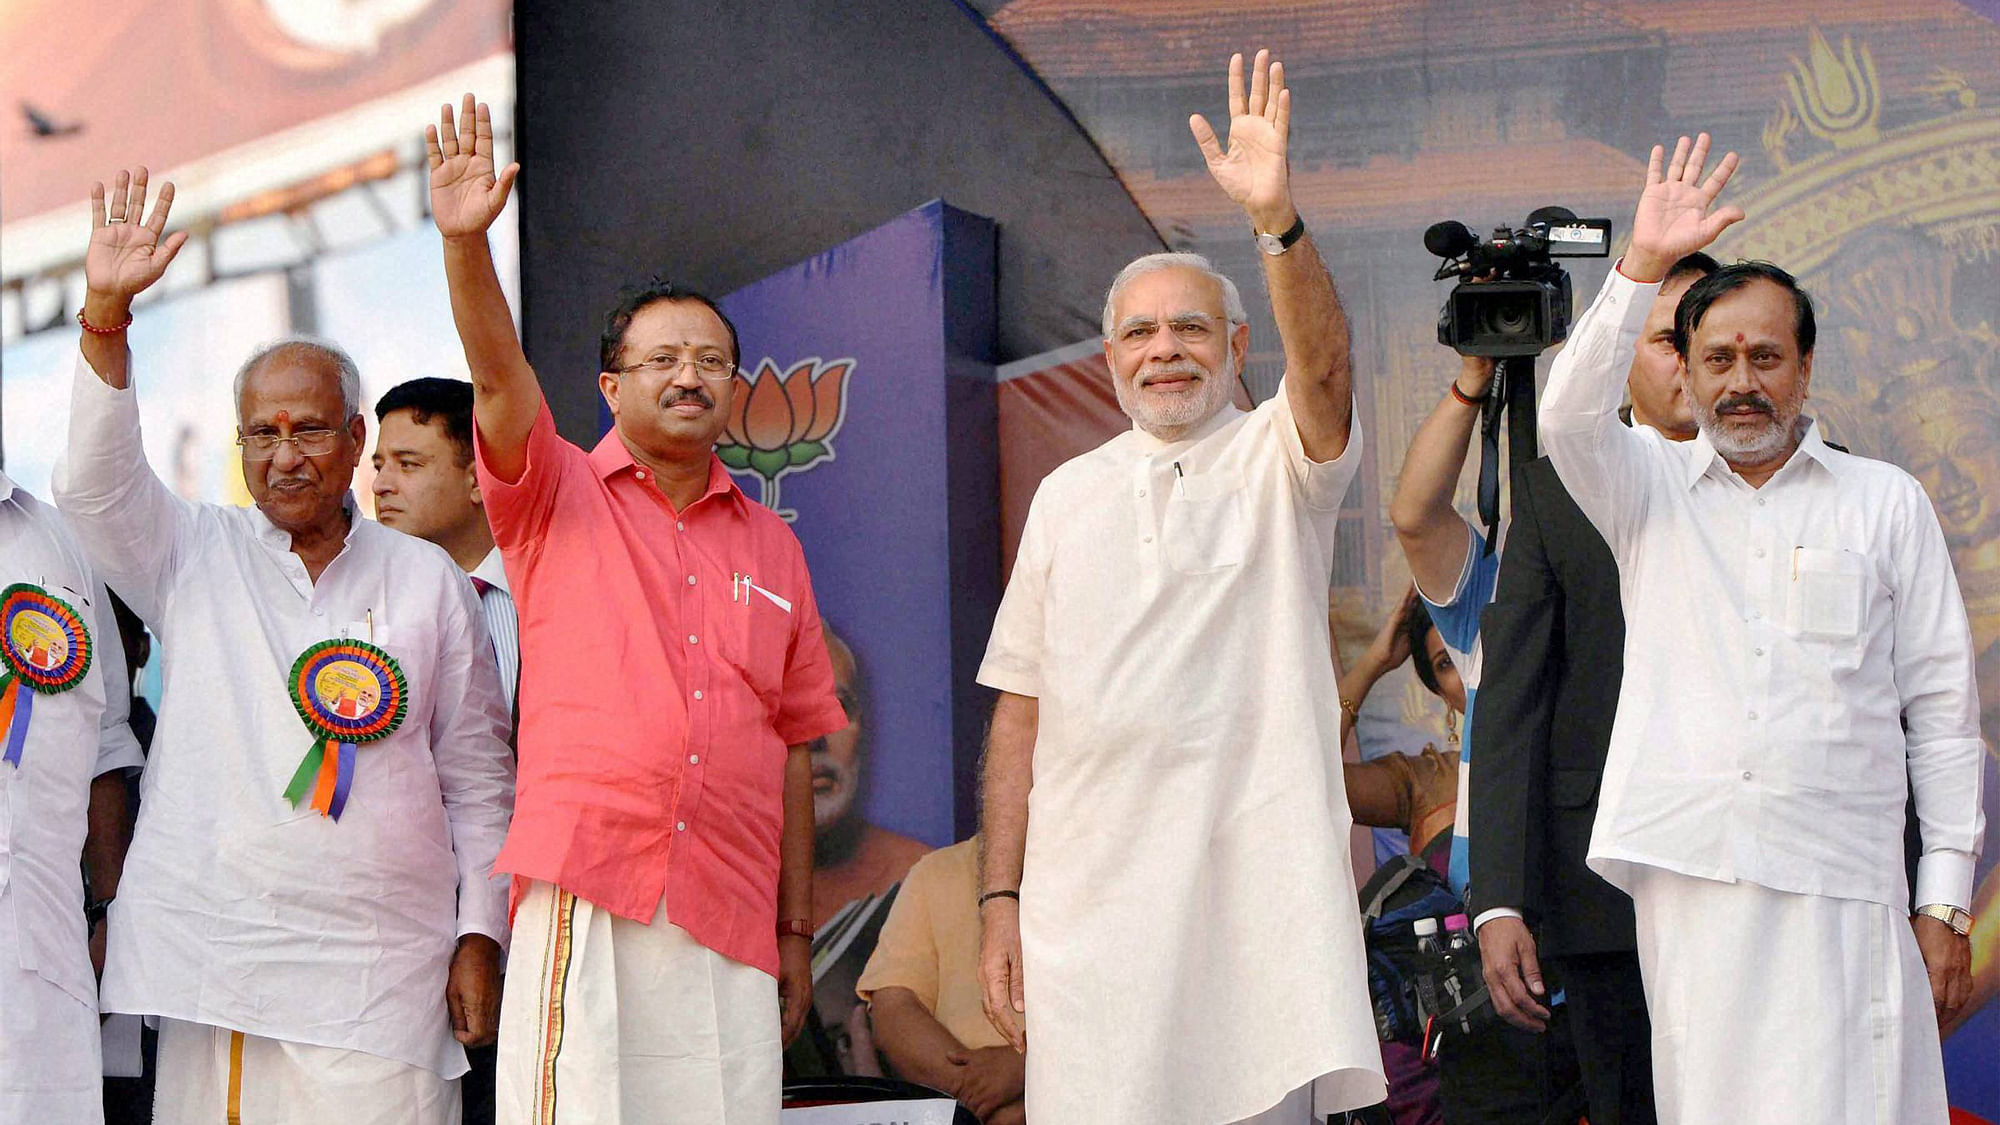 

Prime Minister Narendra Modi waves during a public meeting in Thrissur, Kerala on Monday. (Photo: PTI)